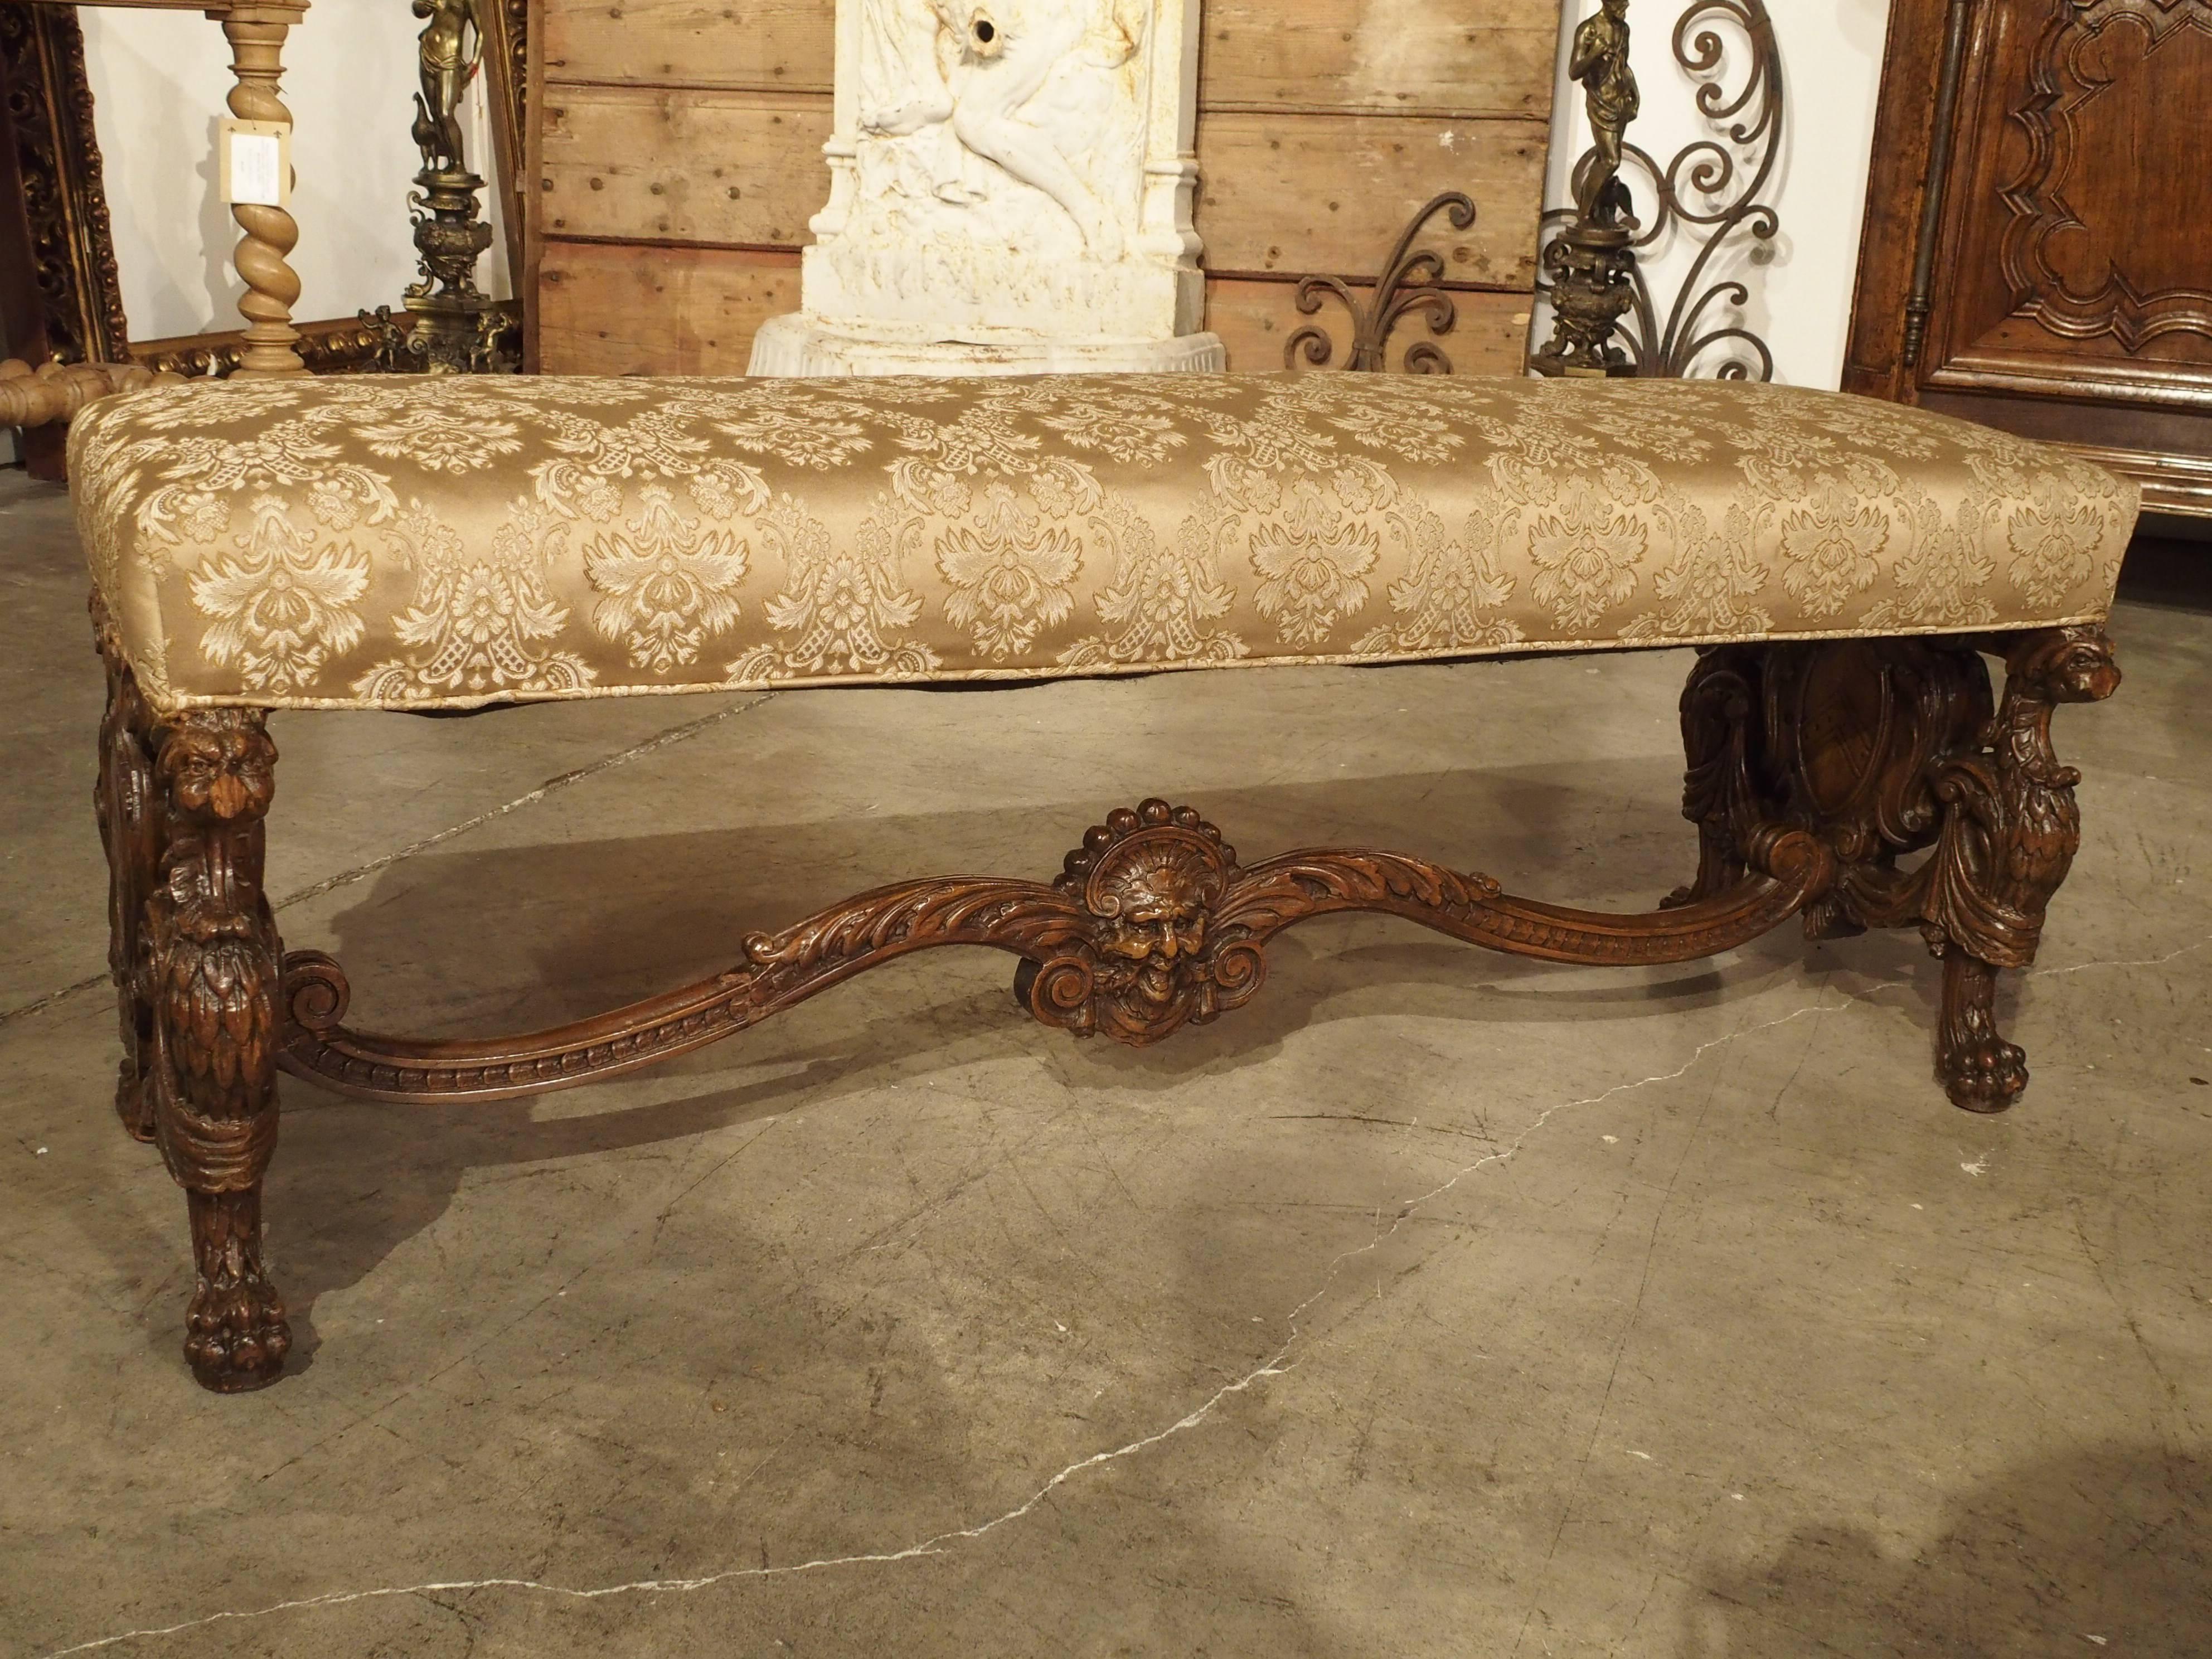 This is a beautifully carved walnut wood Italian bench with padded silk patterned fabric. It dates to the 19th century and most recently belonged to Warner Brothers Studio collection in California. The carving is meticulous with the benches’ legs